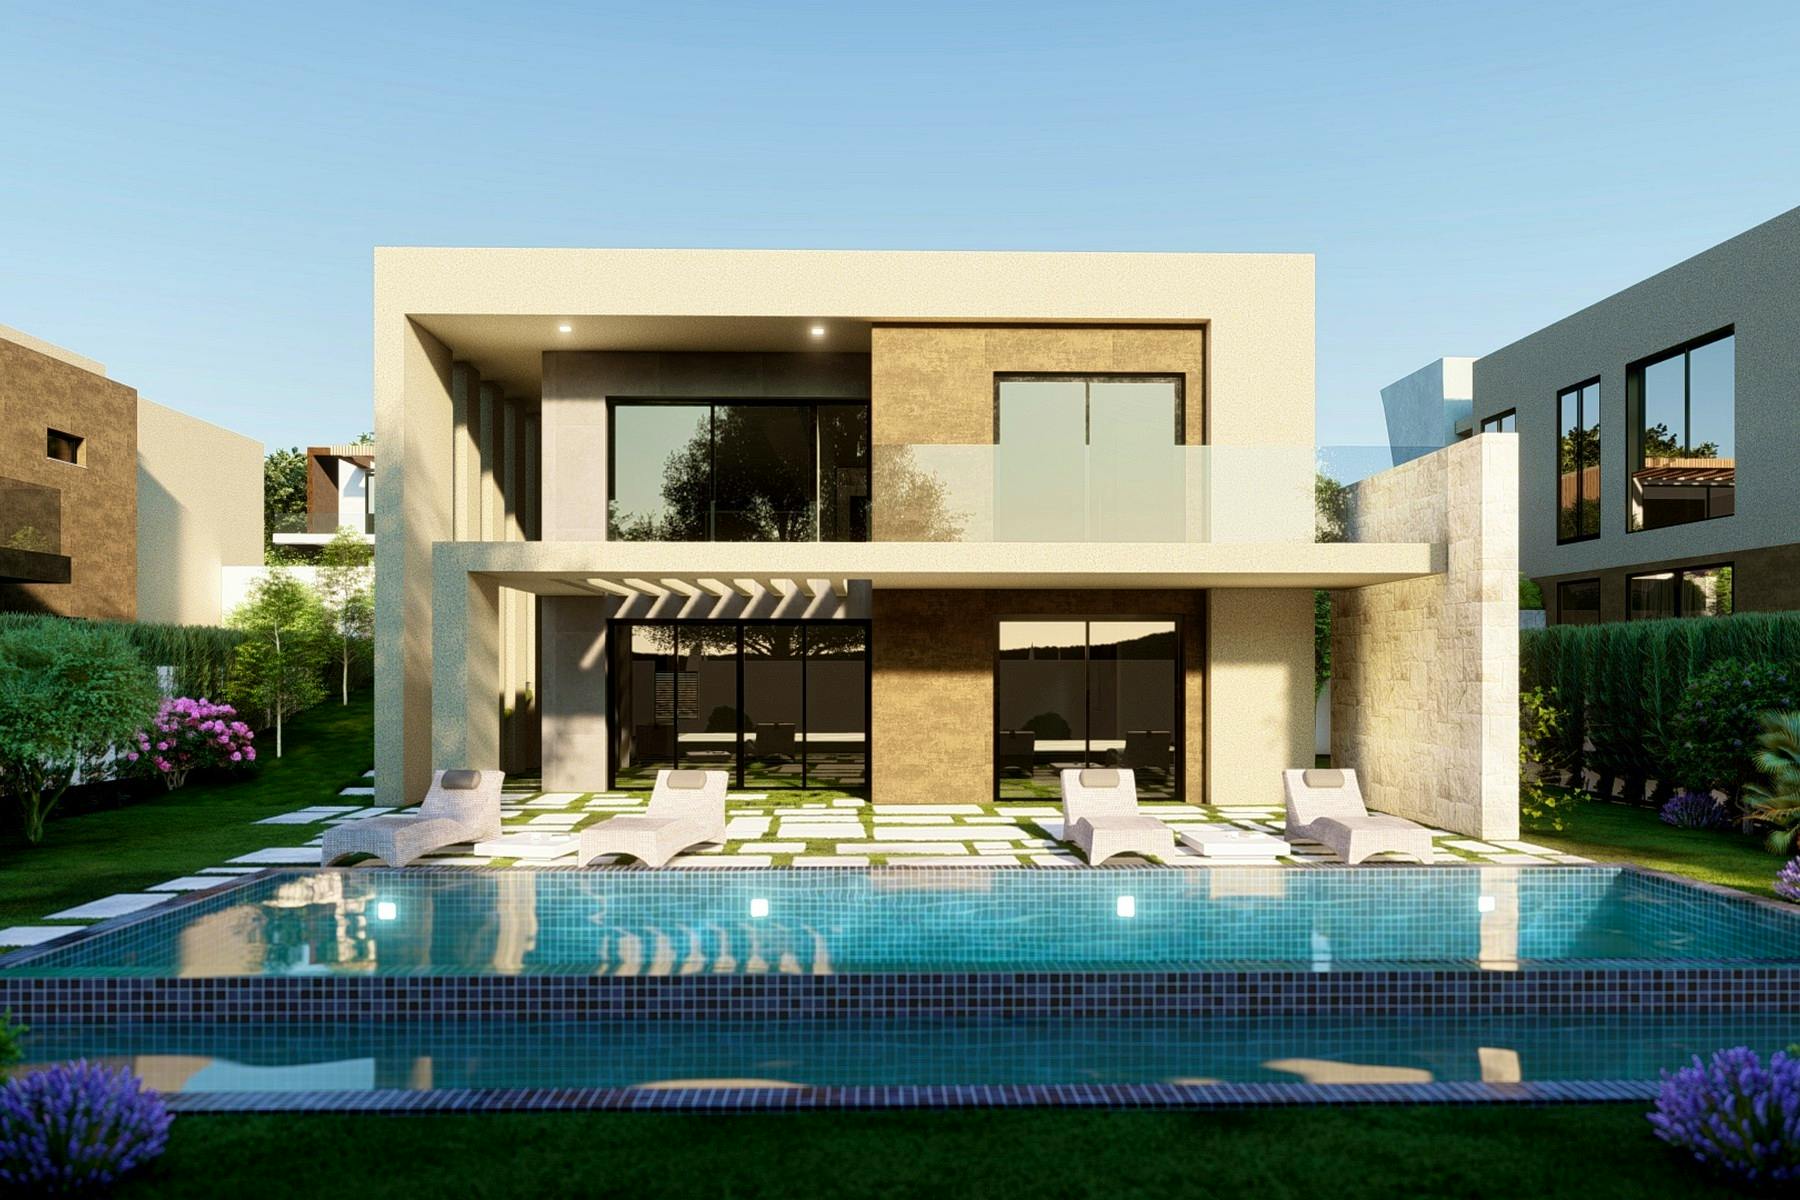 Visualisation of a luxury villa with swimming pool for sale near Zadar